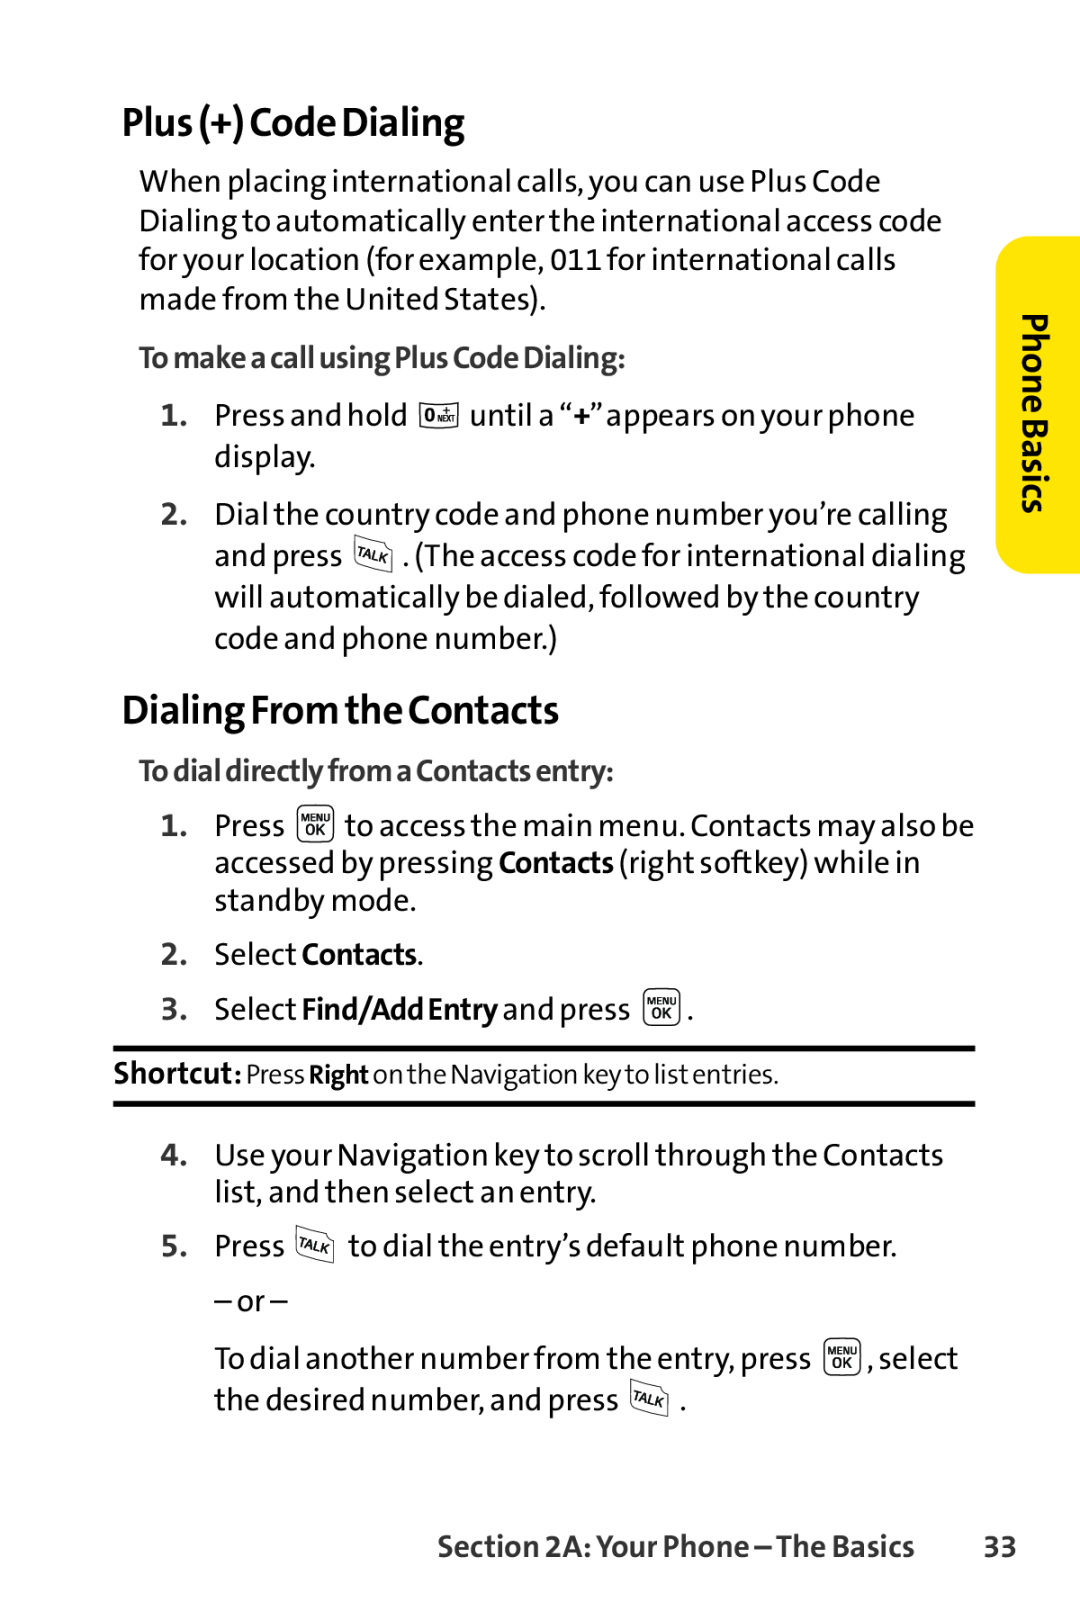 Sprint Nextel LX160 manual Plus + Code Dialing, Dialing Fromthe Contacts, TomakeacallusingPlusCodeDialing, Phone Basics 